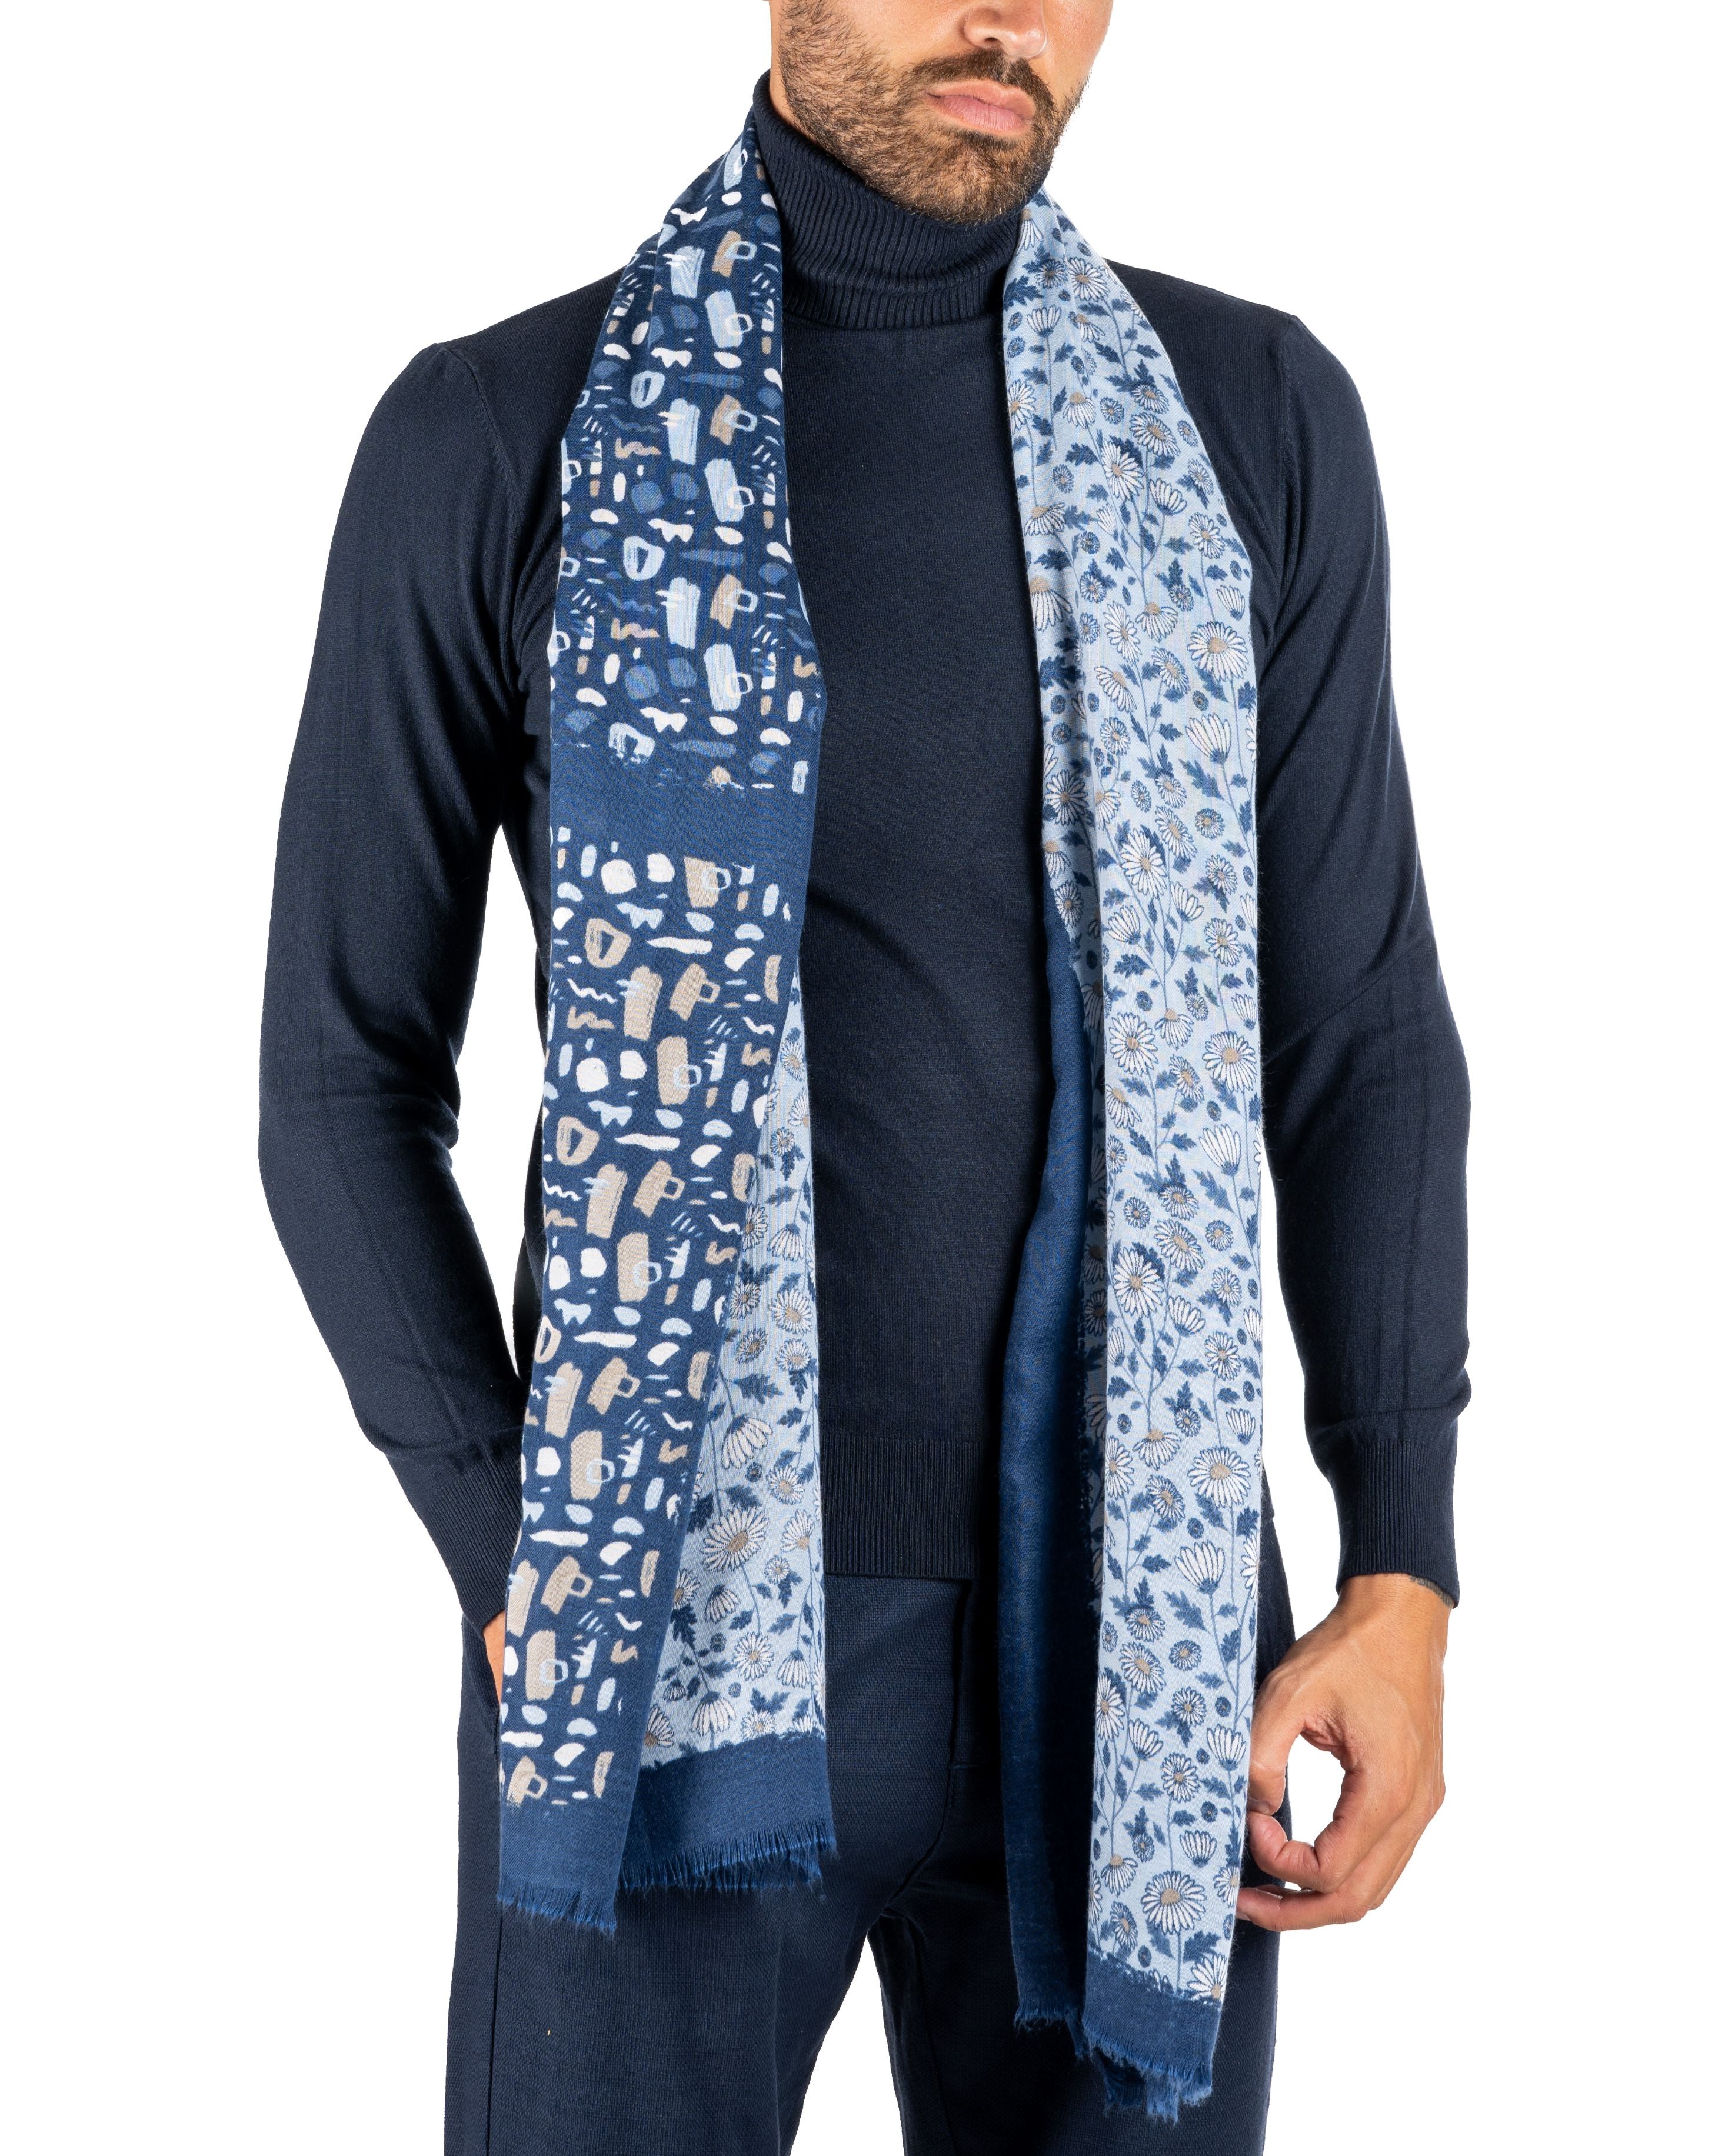 BLUE AND LIGHT BLUE FLORAL PATTERN SCARF 